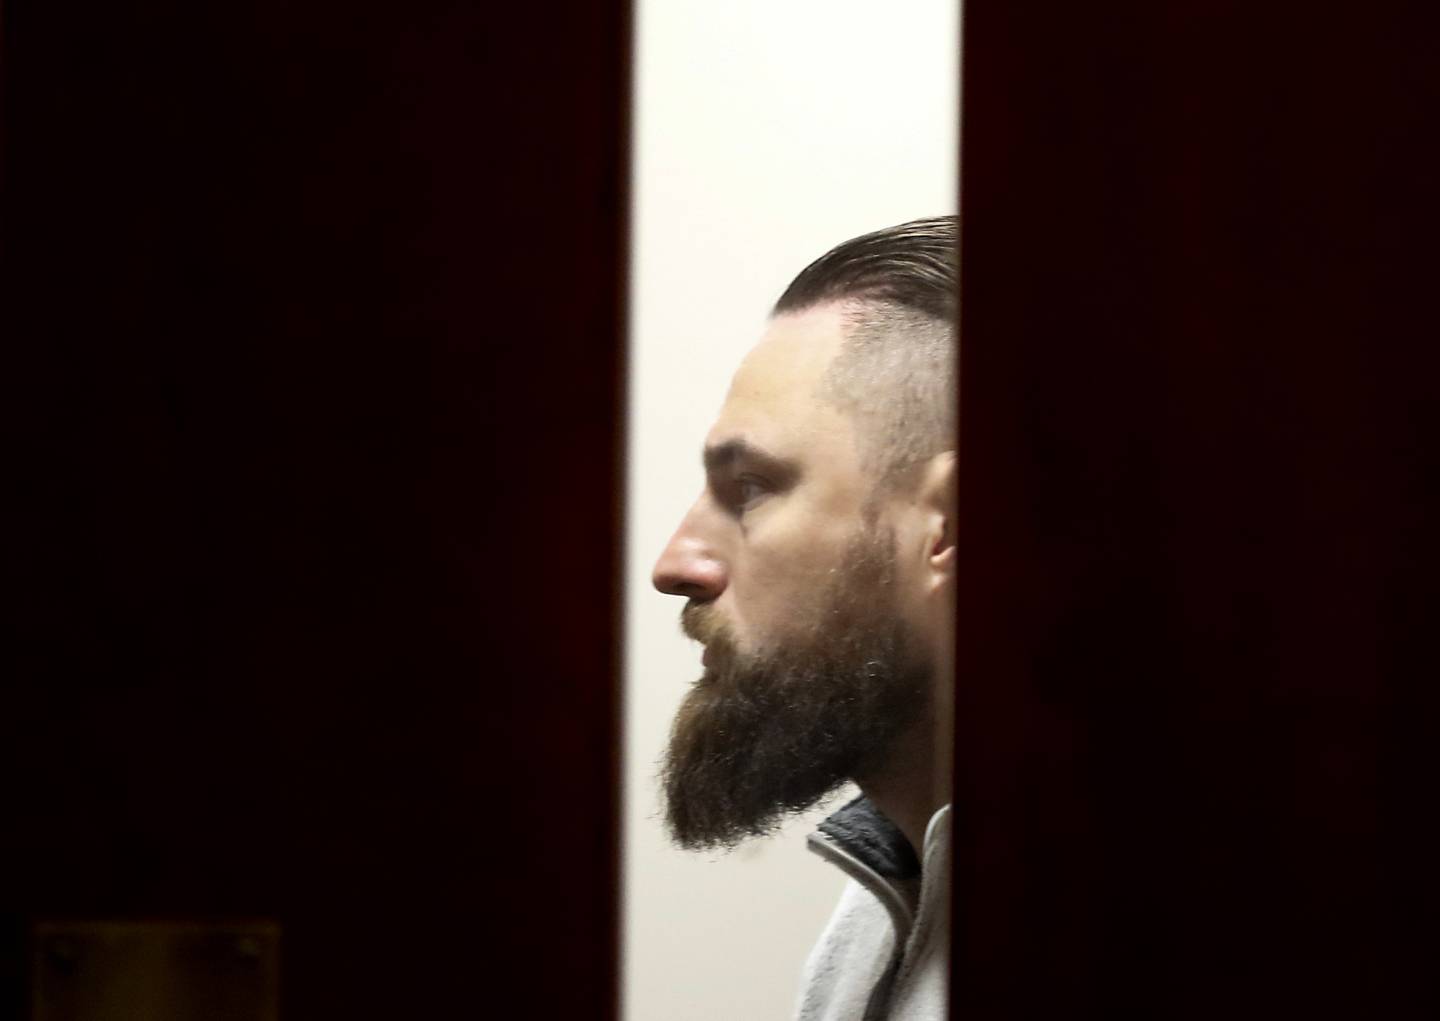 Matthew Lilla talks with his attorney before a court hearing Wednesday, April 12, 2023, in the McHenry County courthouse. Lilla, 36, of Chicago, is charged with drug trafficking and other felonies.